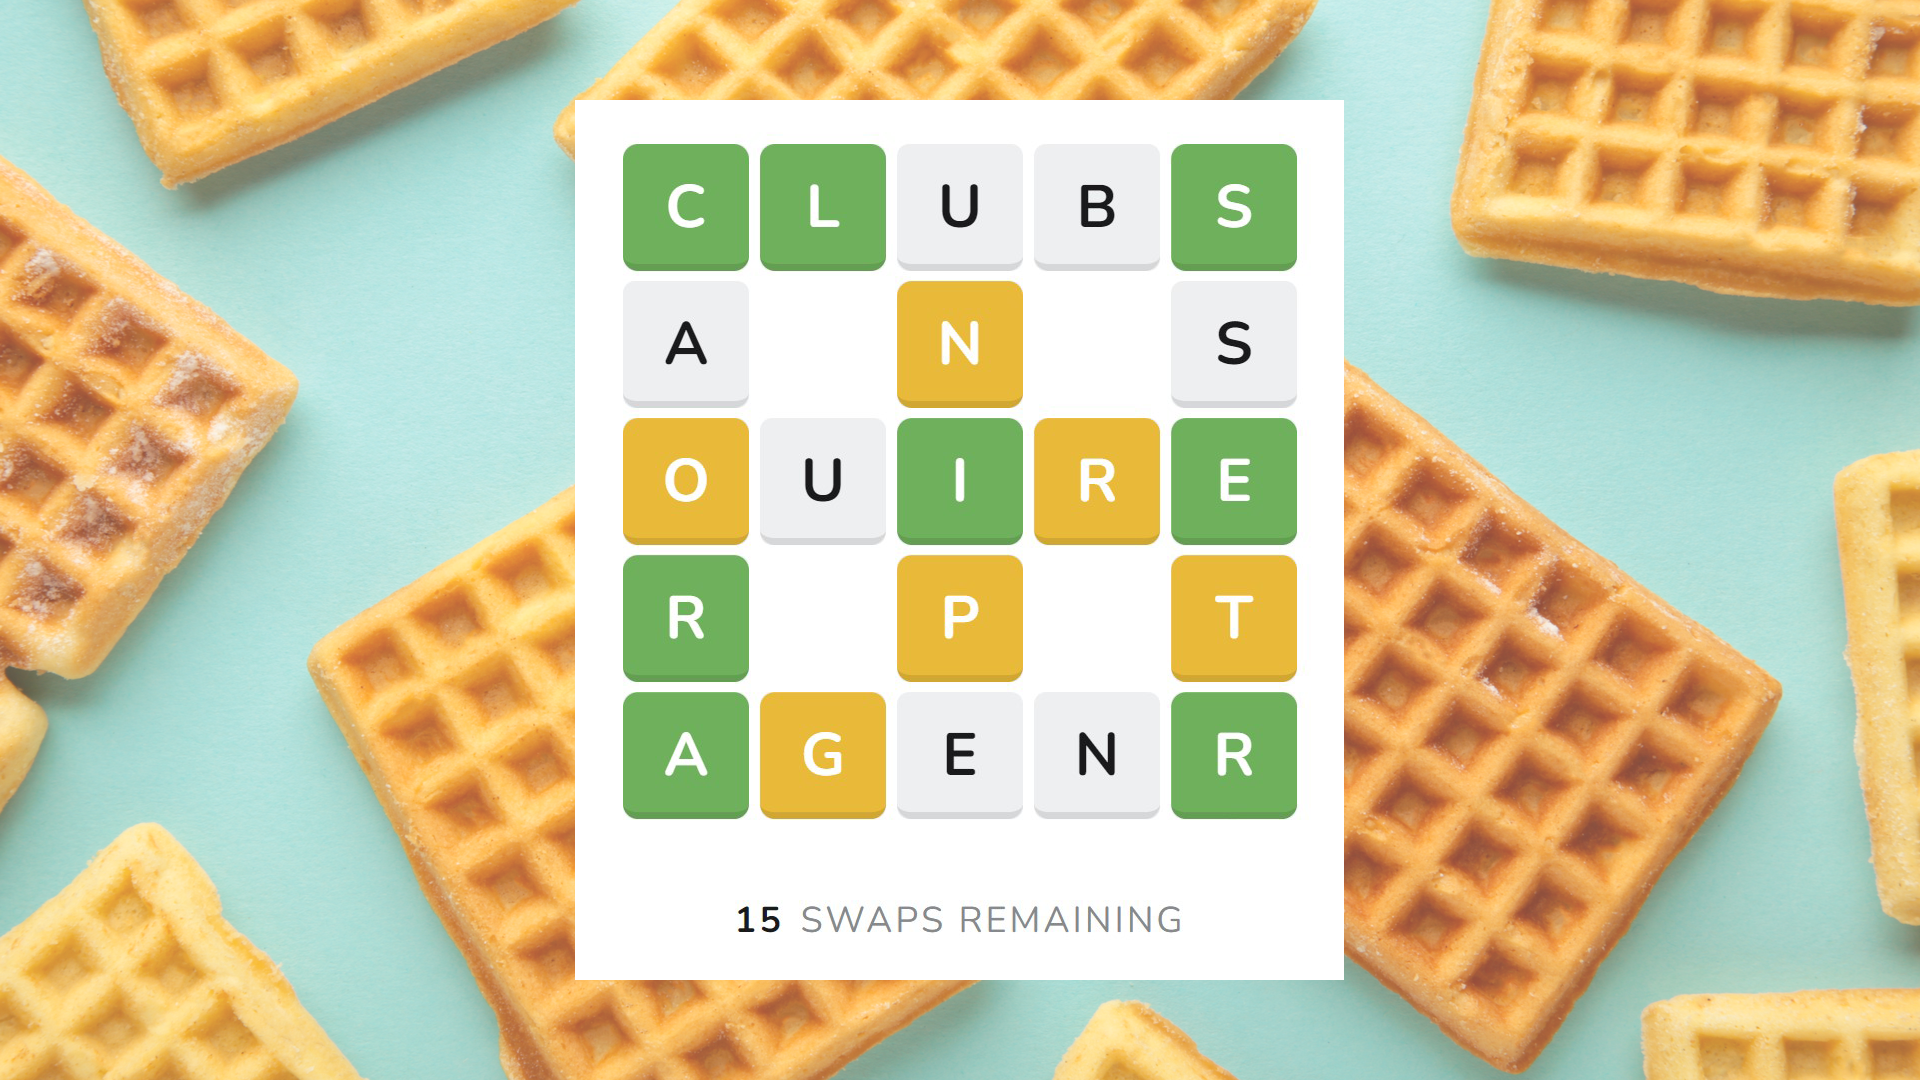 Every Wordle player should try Waffle, a daily word puzzle that's